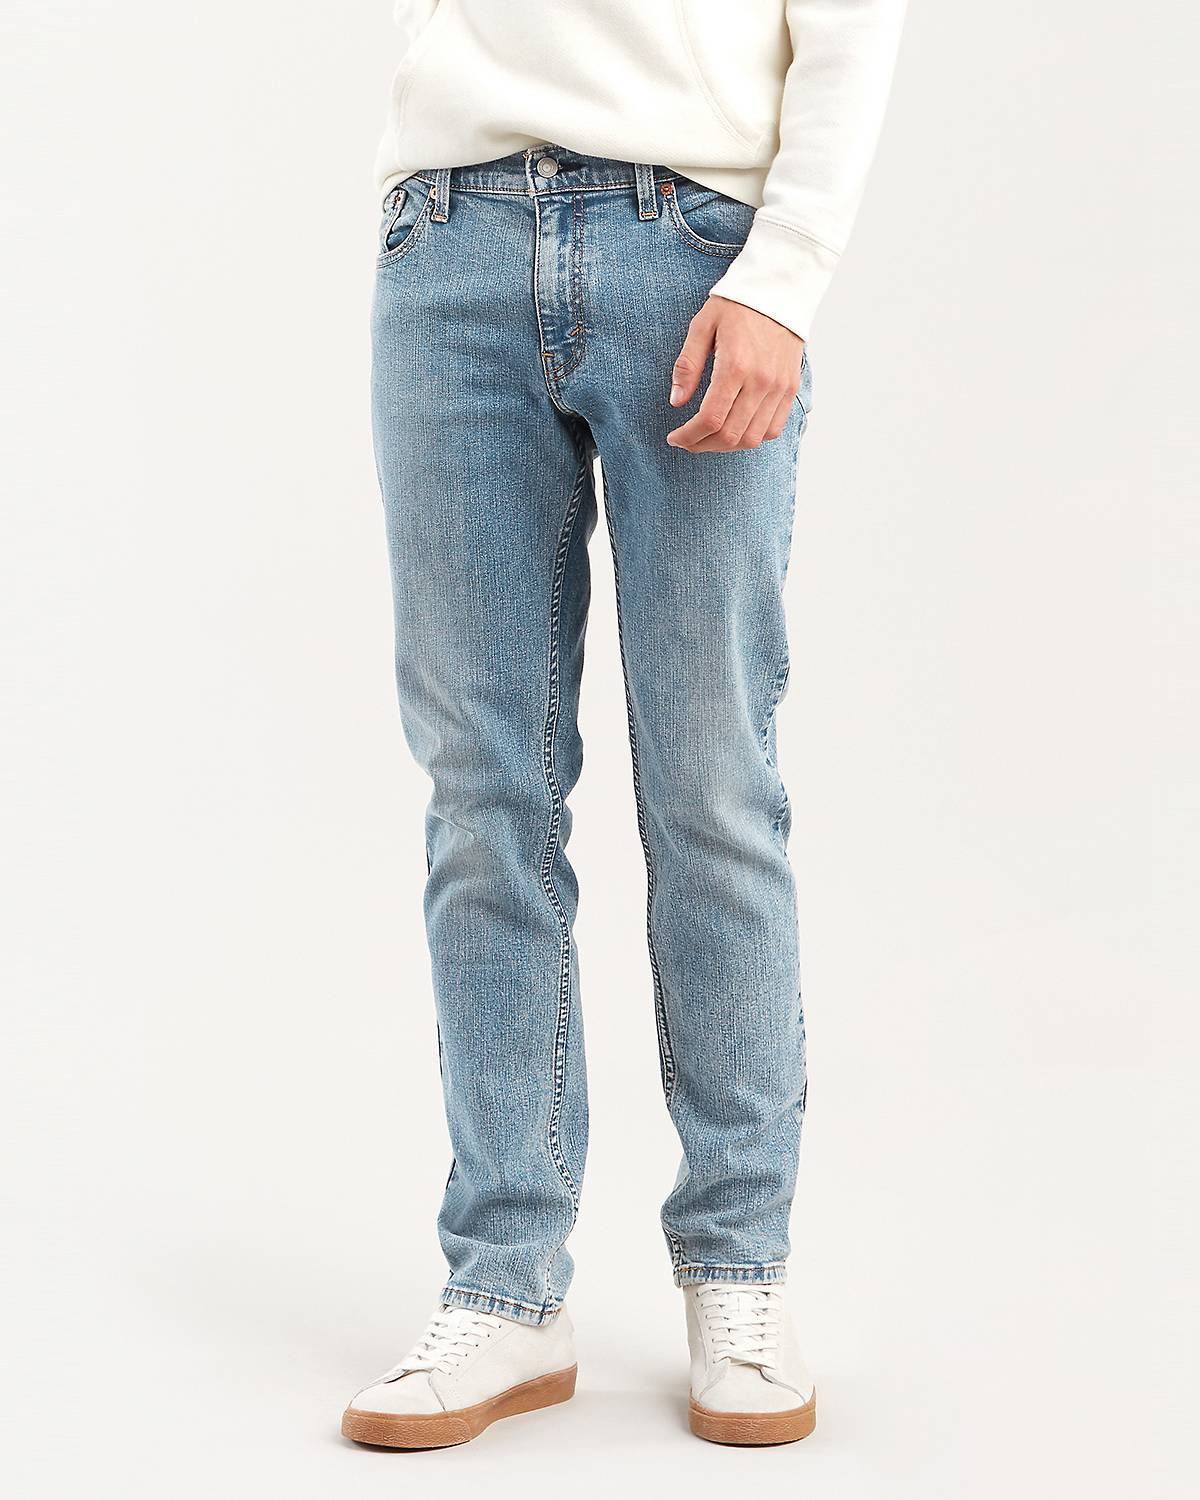 Blue jeans men are a timeless wardrobe staple for men, offering versatility, comfort, and style. With countless